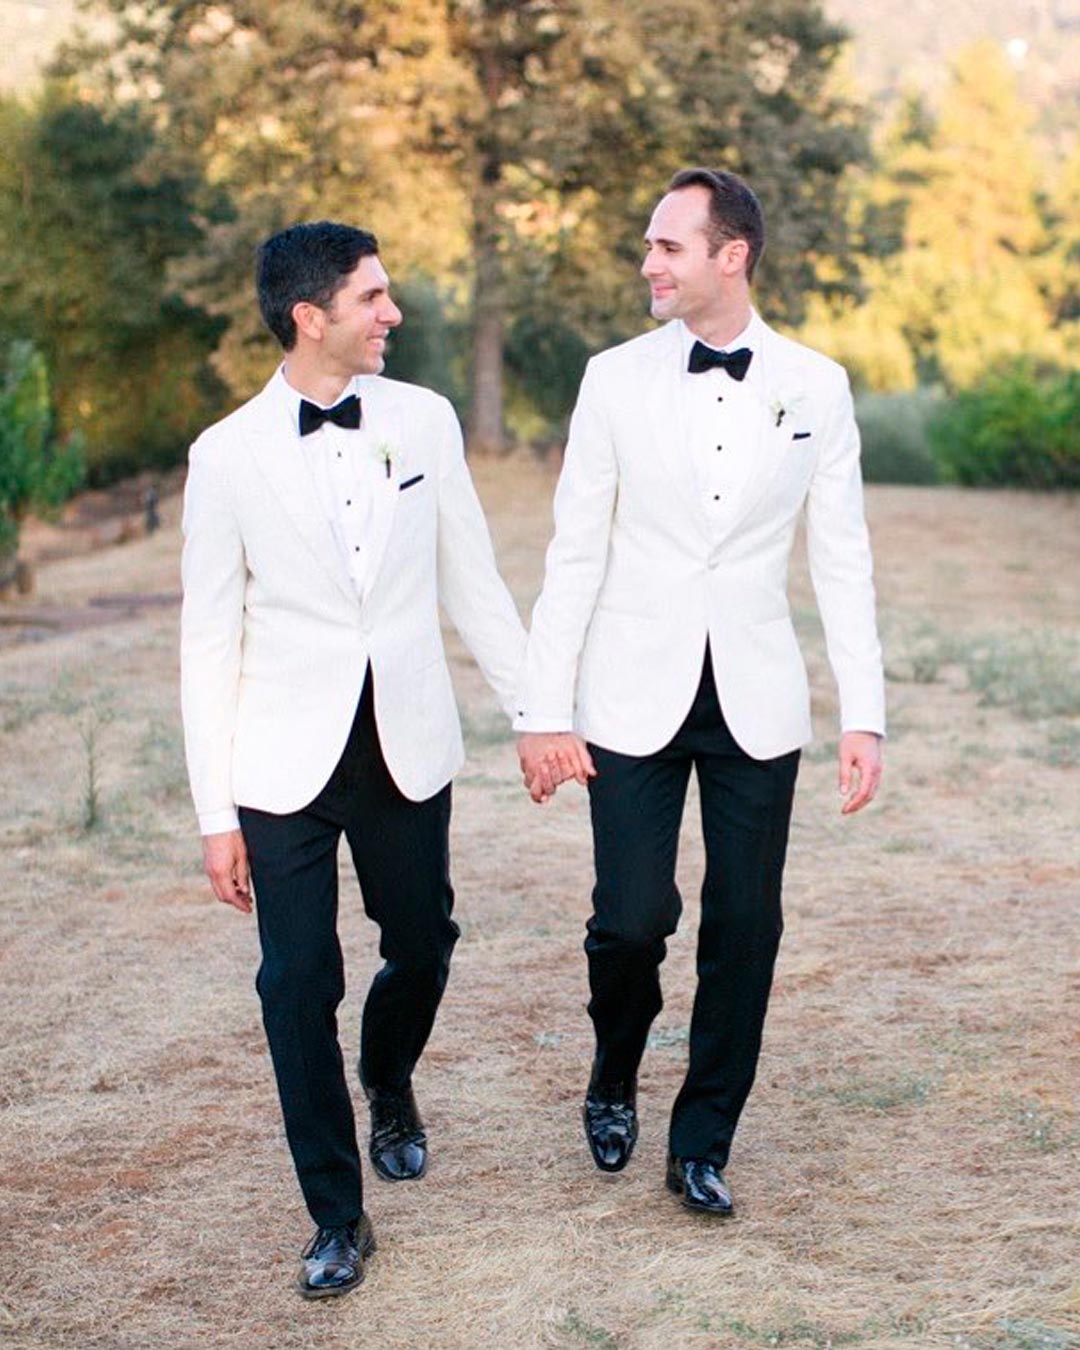 traditional wedding vows gay ceremony